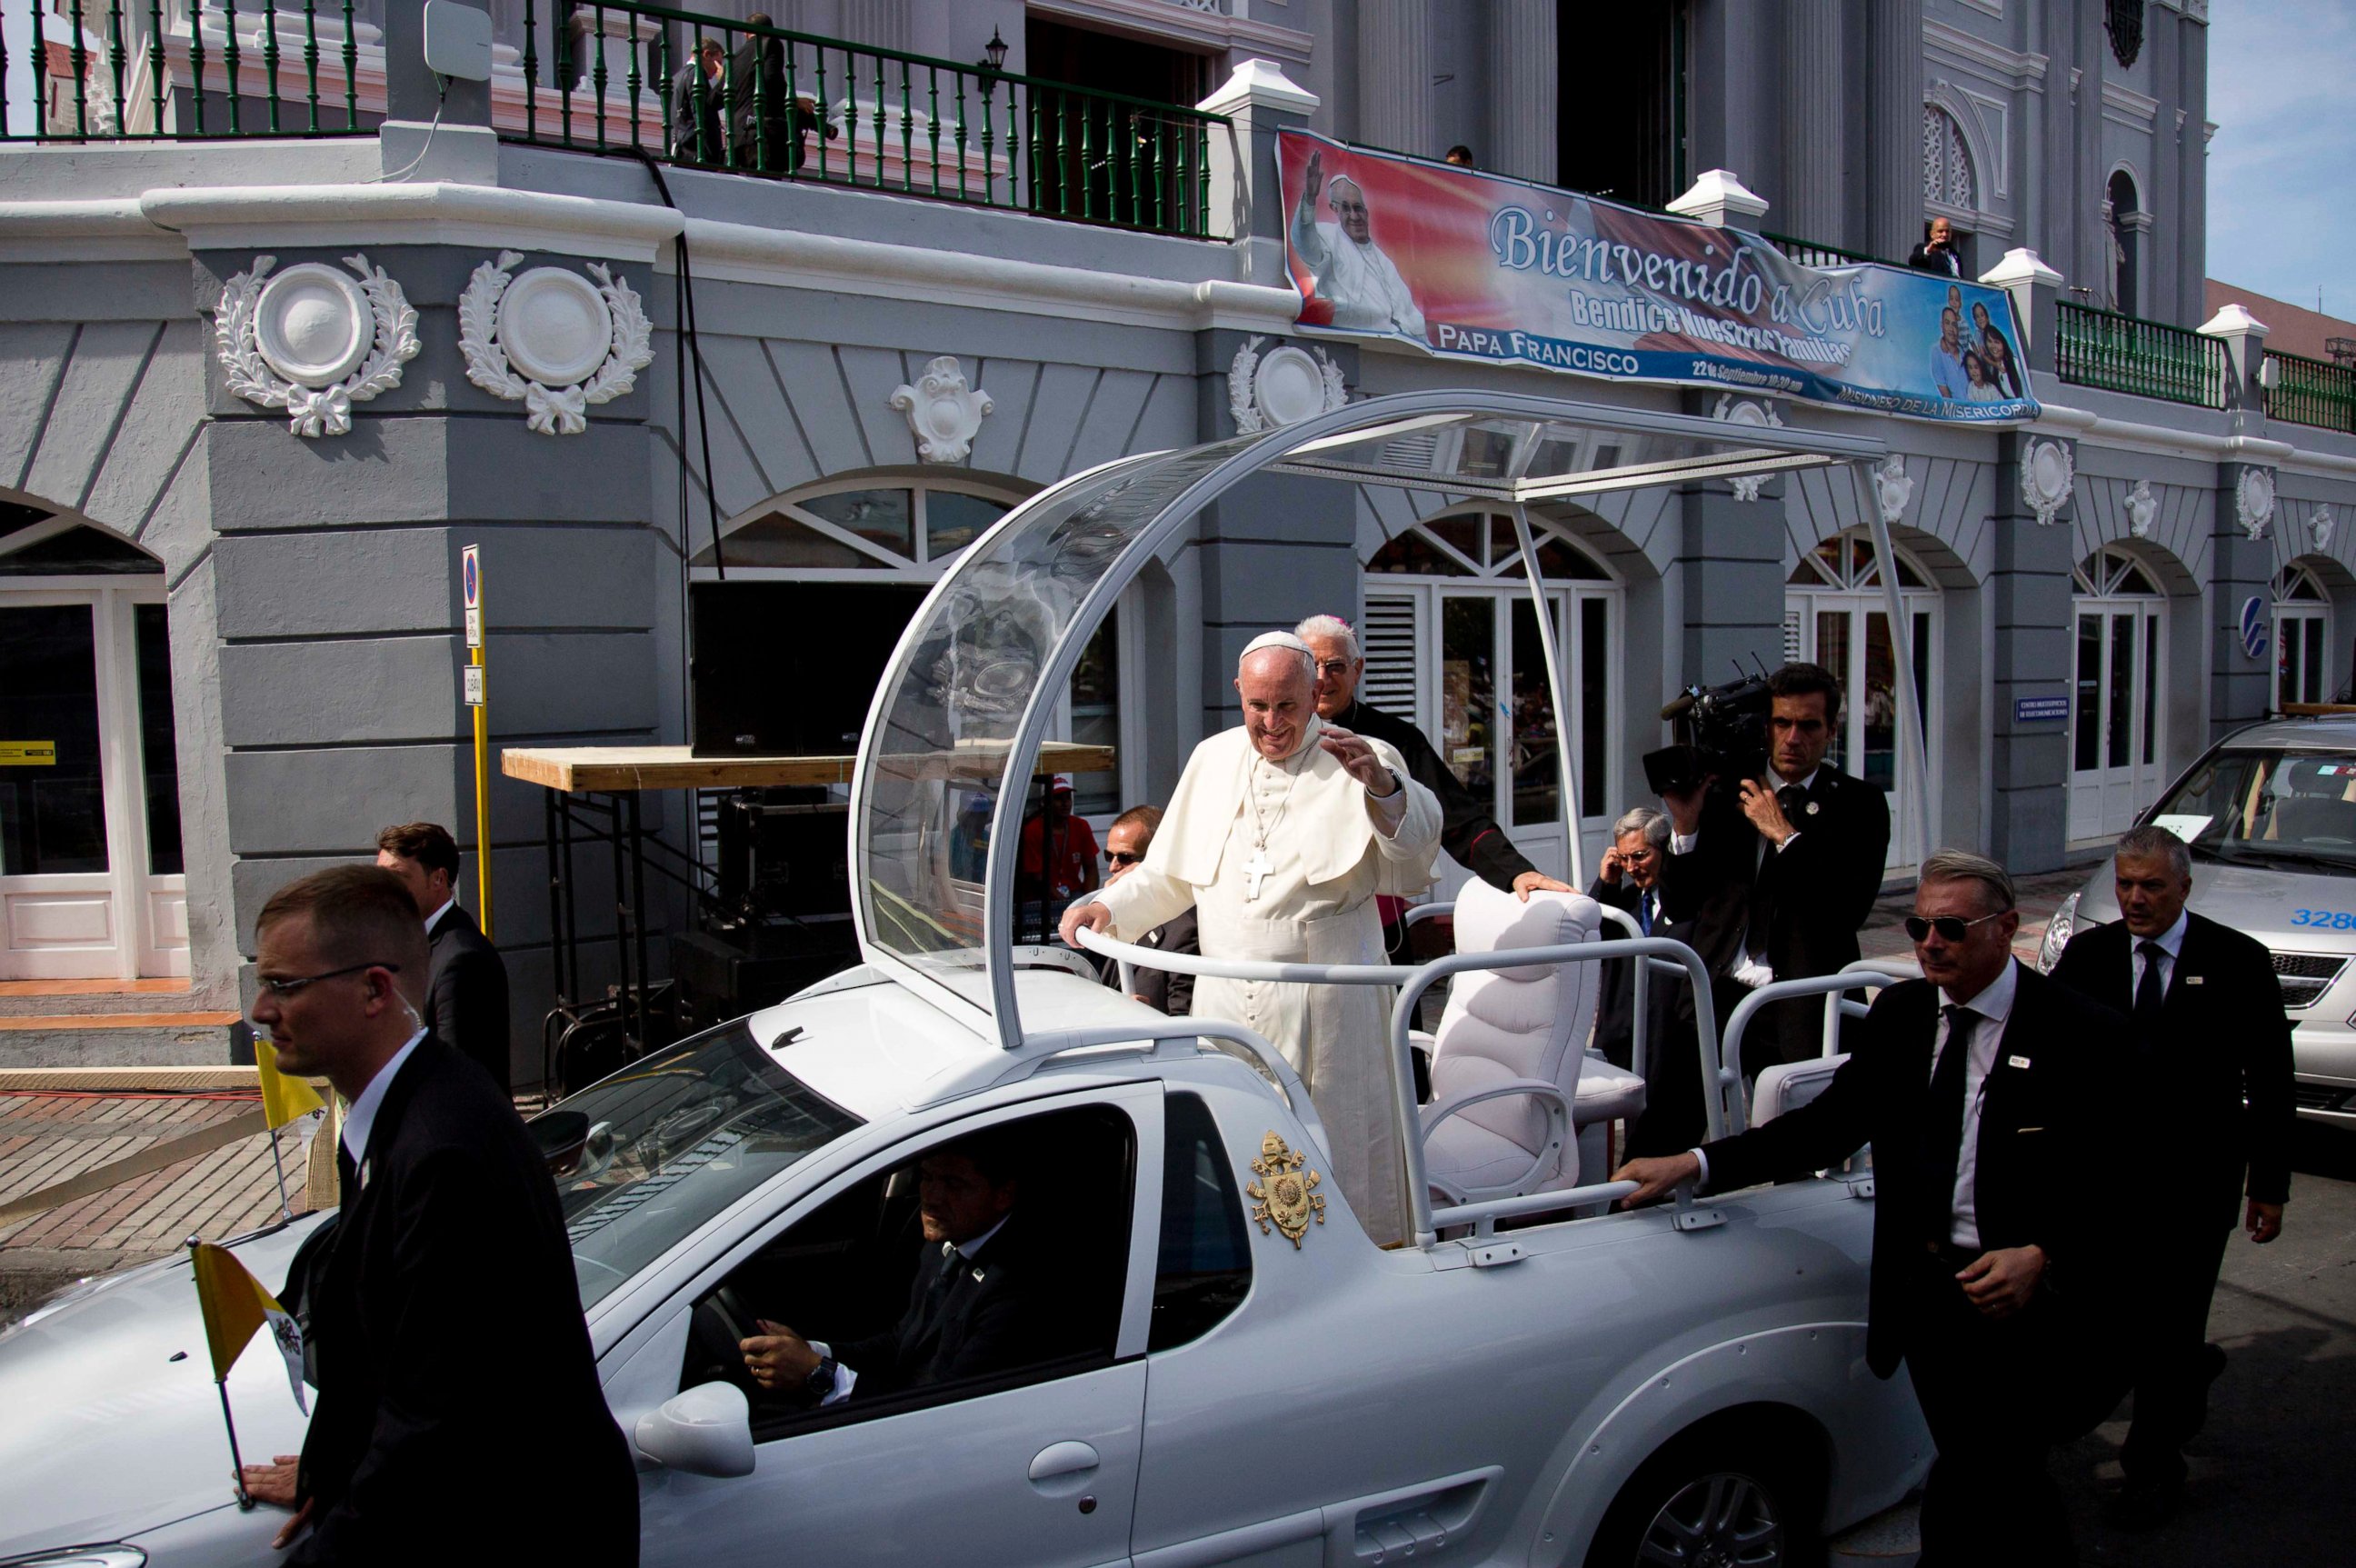 PHOTO: Security surrounds Pope Francis' popemobile as he makes his way to the Metropolitan Cathedral to celebrate Mass in Santiago de Cuba, Cuba, Sept. 22, 2015.